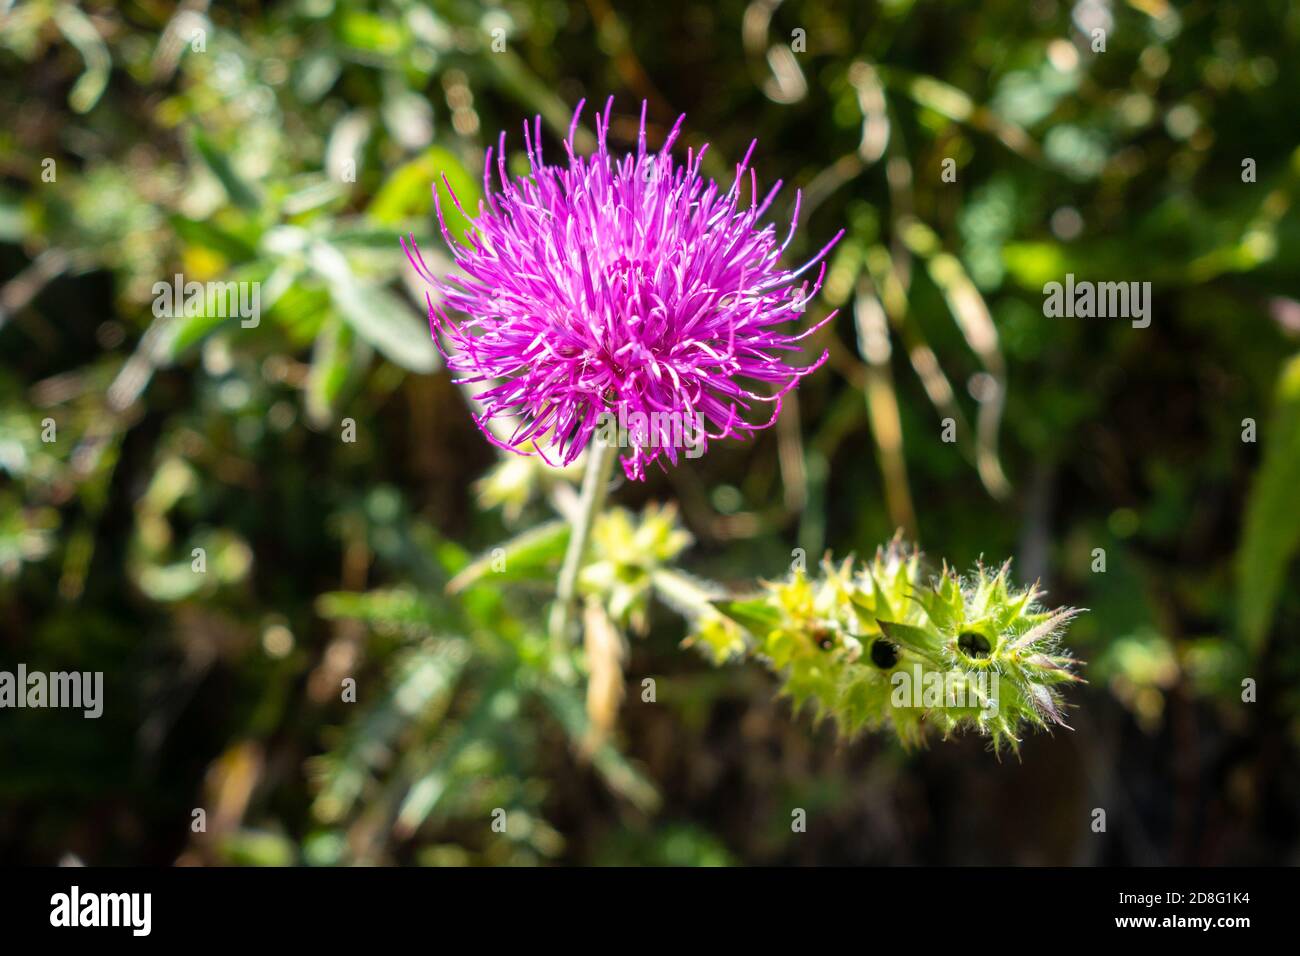 Cirsium flowers close up view in Vanoise national Park, France Stock Photo